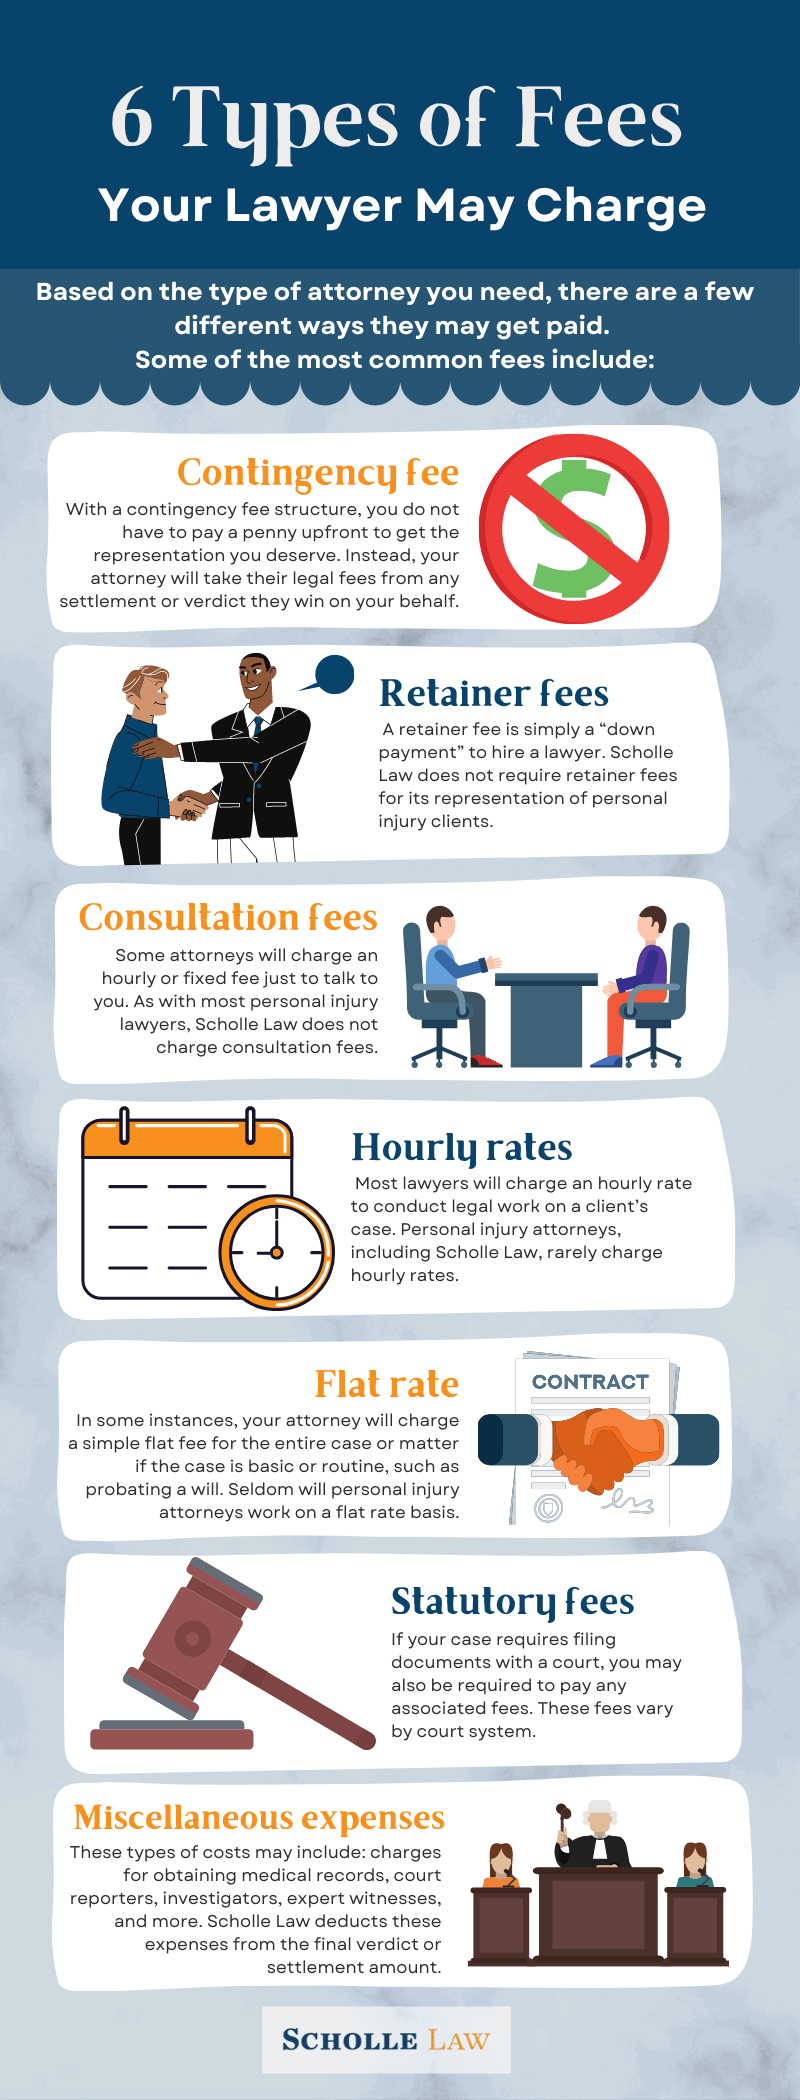 Types of Fees Your Lawyer May Charge